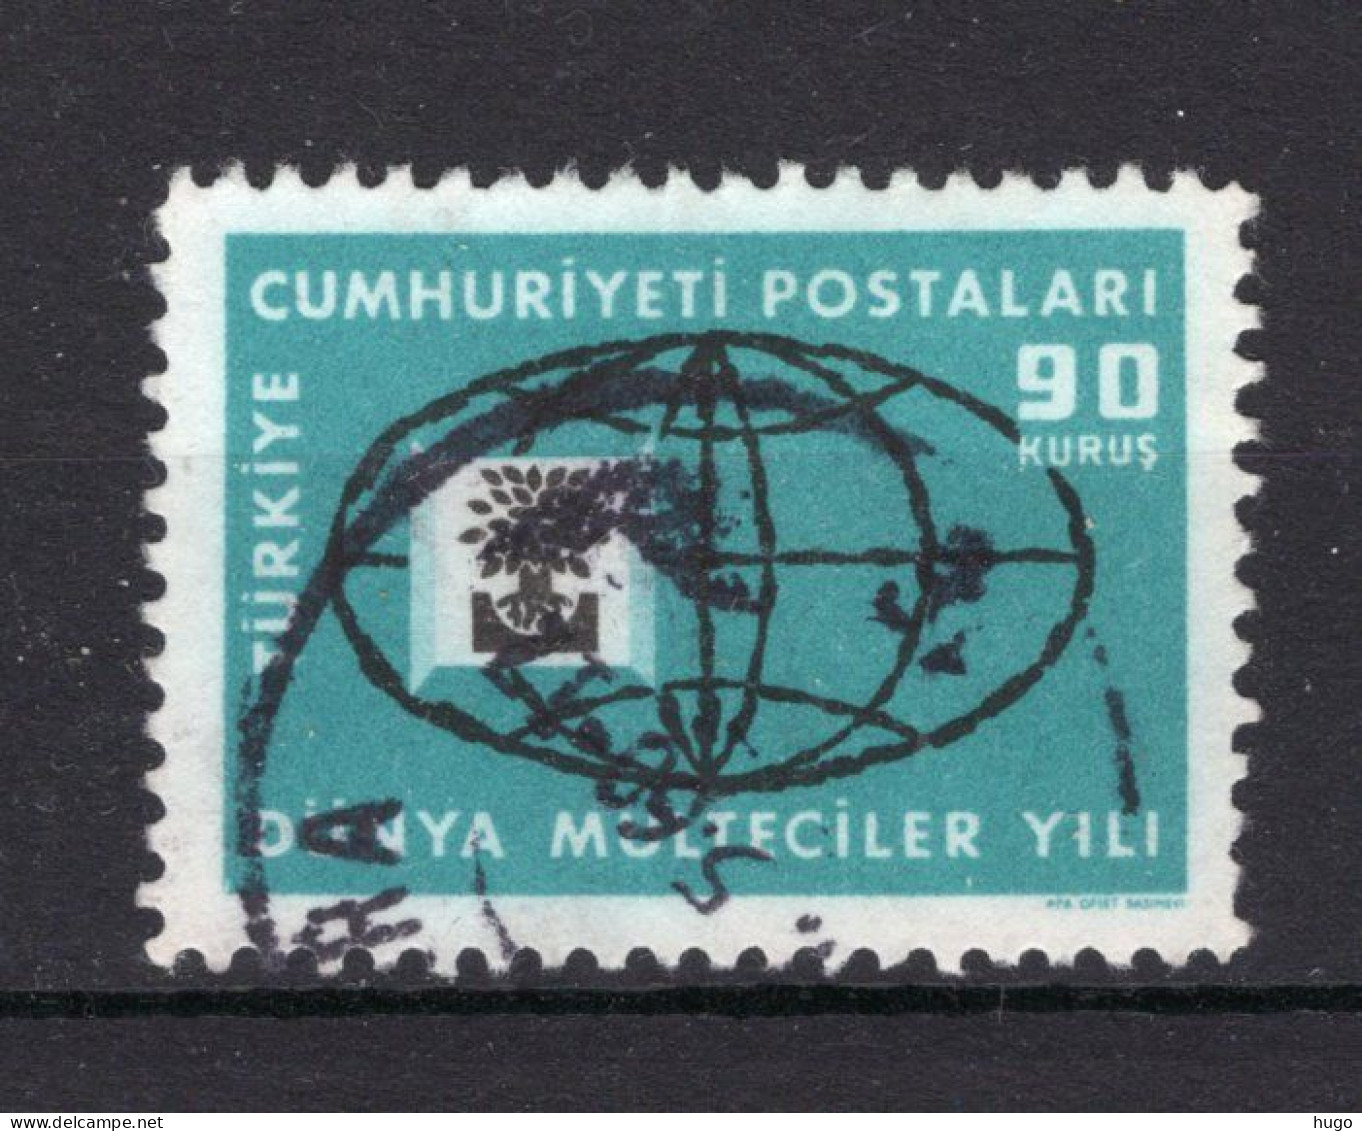 TURKIJE Yt. 1522° Gestempeld 1960 - Used Stamps